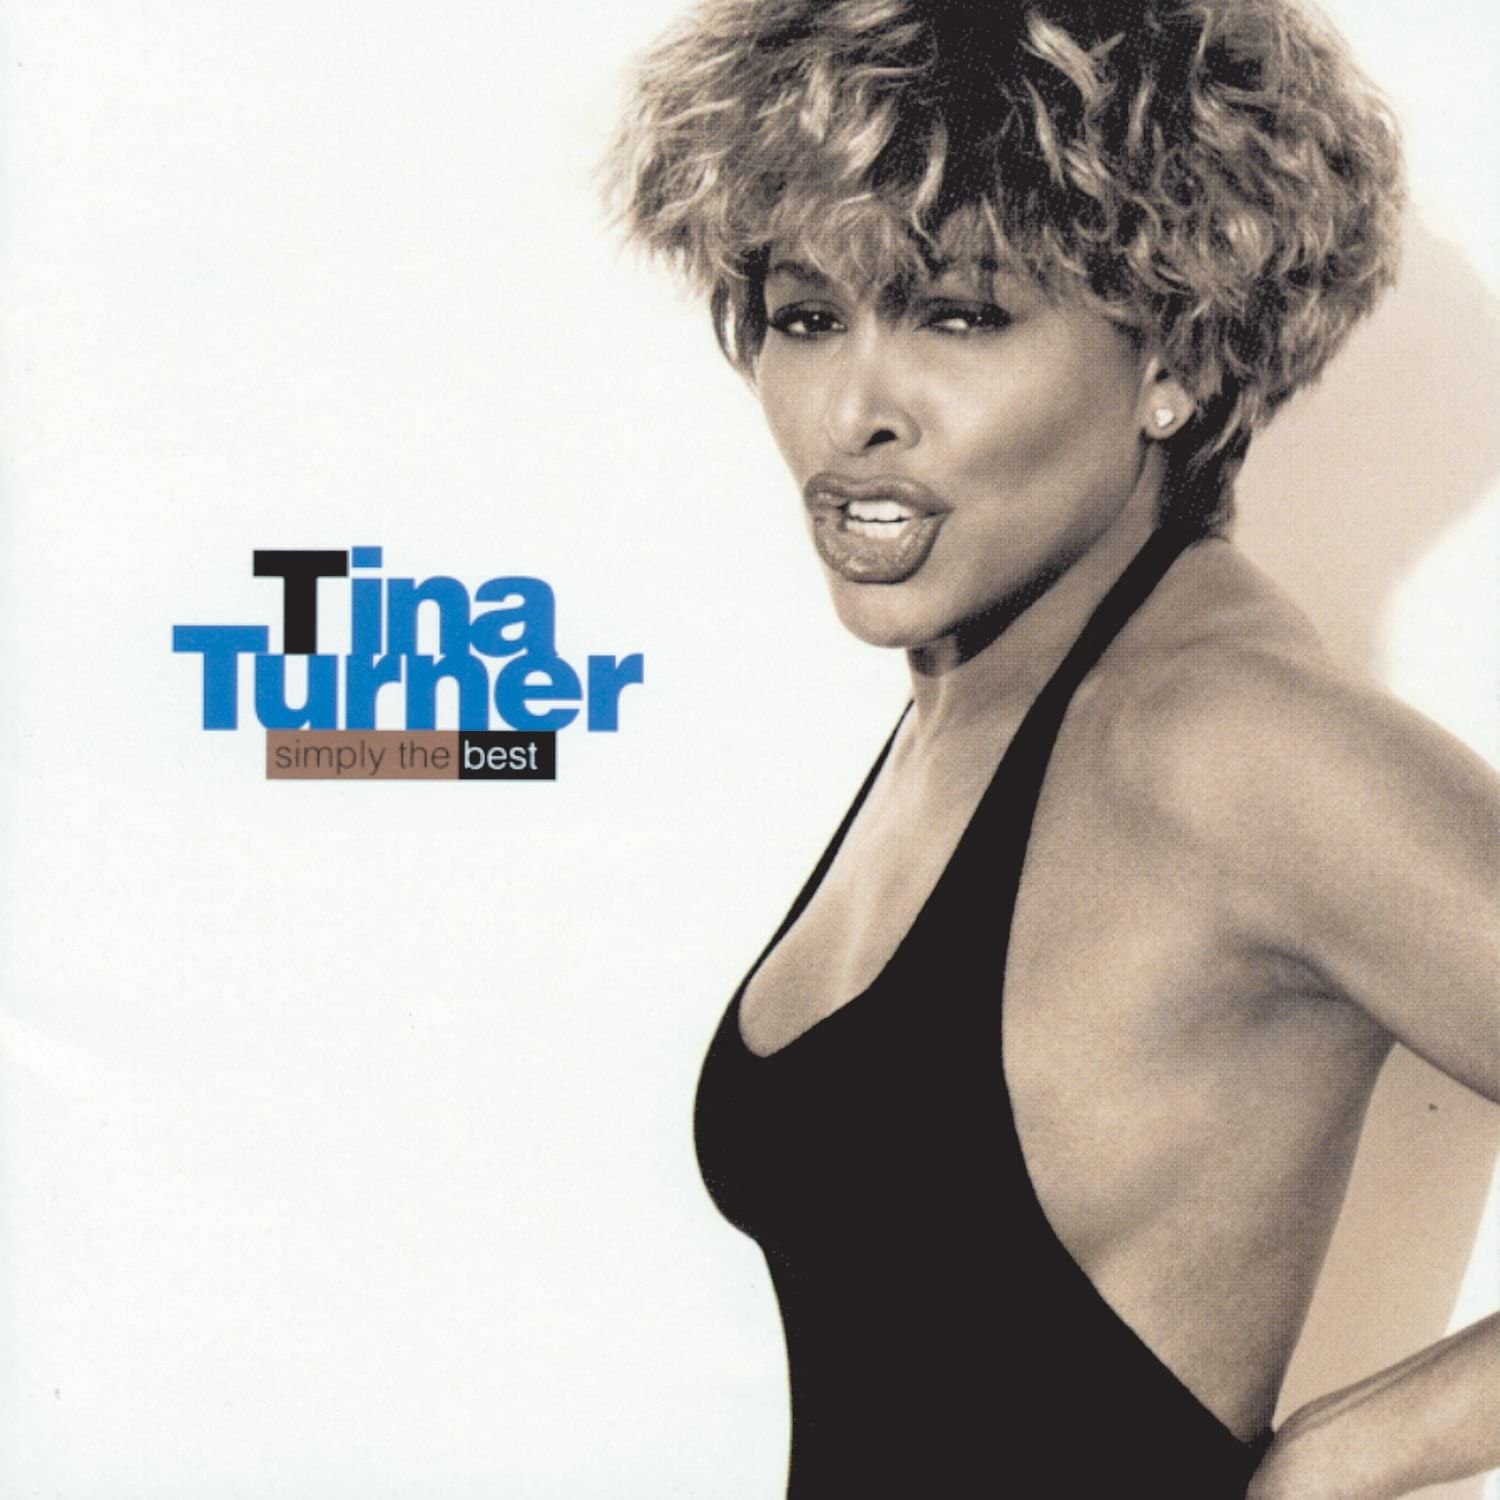 A collection of Tina Turner's most beloved hits collected together on double Vinyl for the first time.